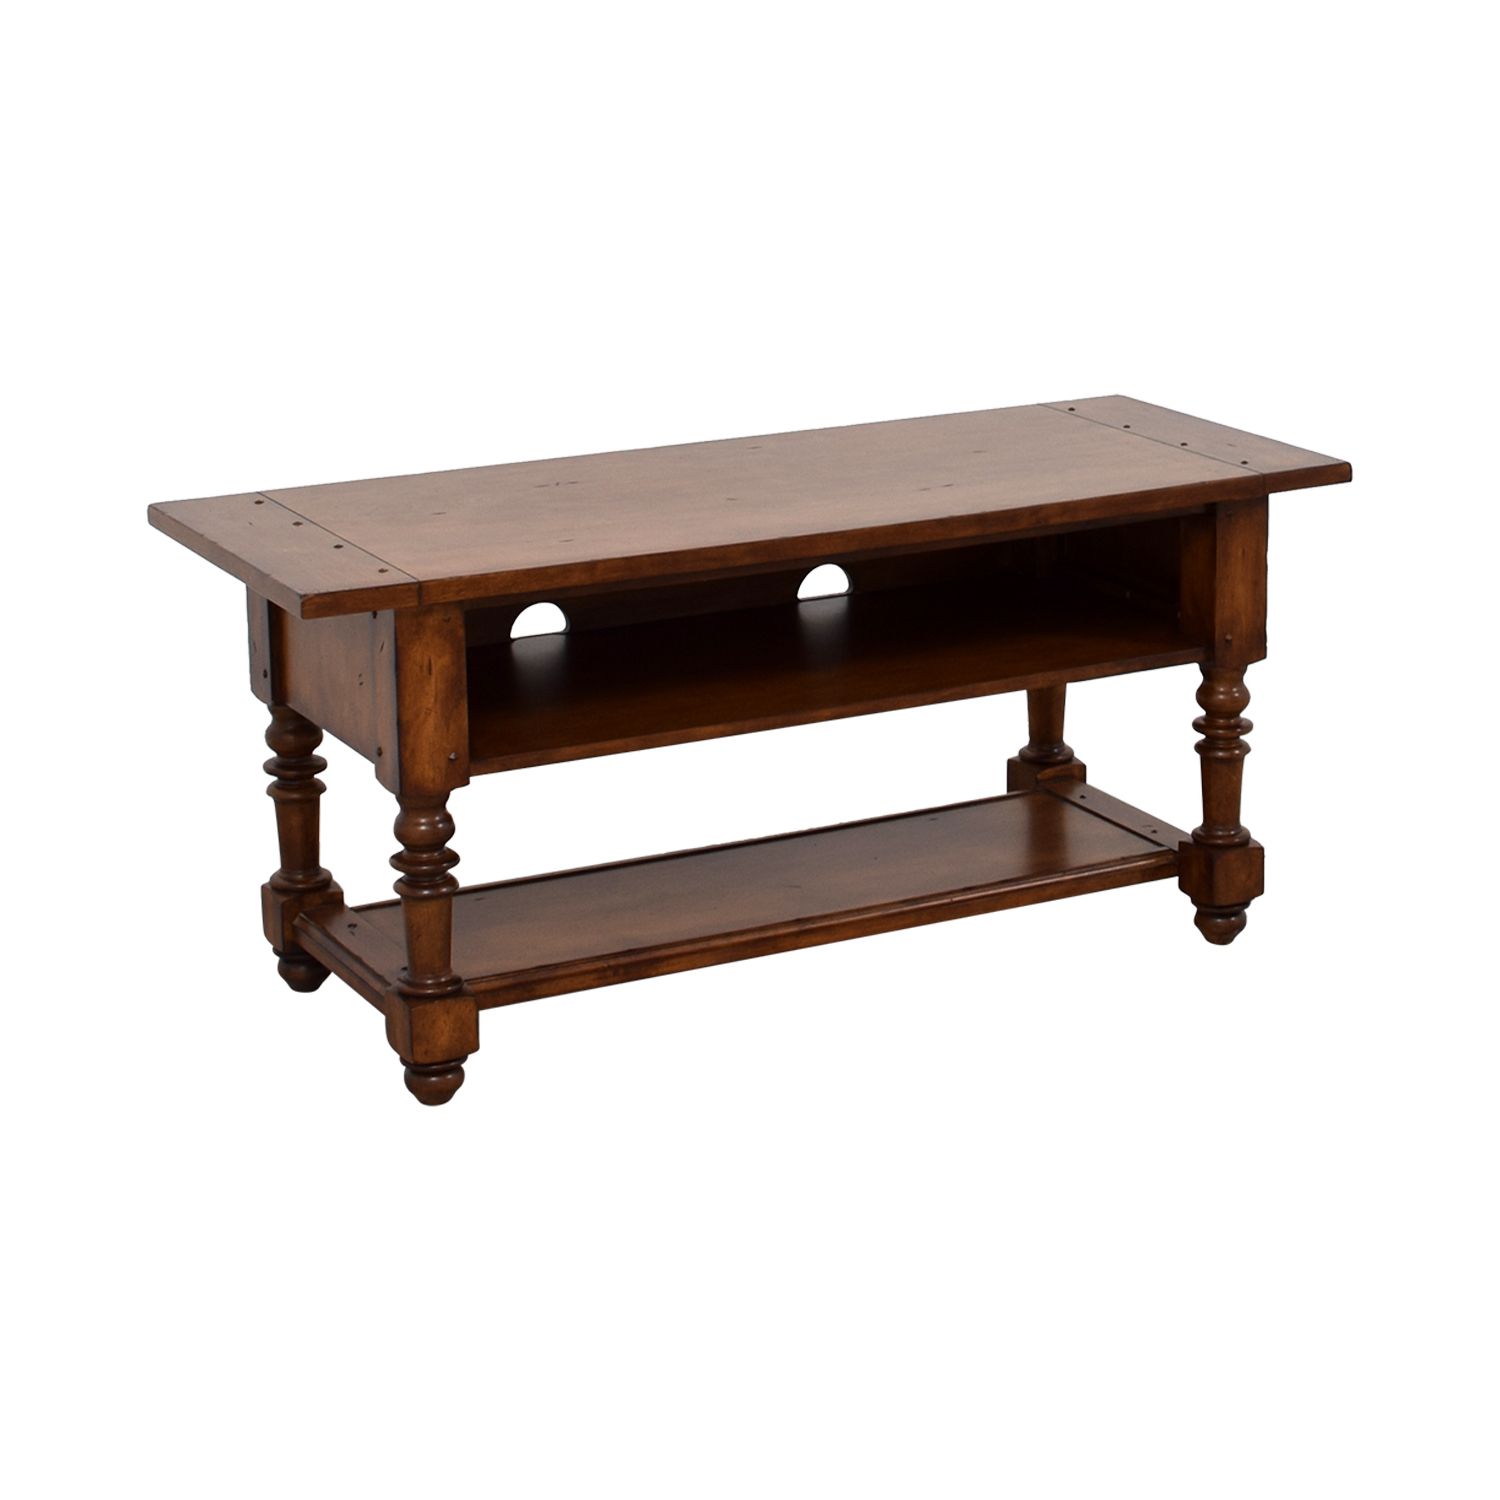 [%90% Off – Pottery Barn Pottery Barn Como Wood Tv Stand / Storage Within Widely Used Como Tv Stands|como Tv Stands With Regard To 2017 90% Off – Pottery Barn Pottery Barn Como Wood Tv Stand / Storage|well Known Como Tv Stands Regarding 90% Off – Pottery Barn Pottery Barn Como Wood Tv Stand / Storage|most Up To Date 90% Off – Pottery Barn Pottery Barn Como Wood Tv Stand / Storage With Como Tv Stands%] (View 11 of 20)